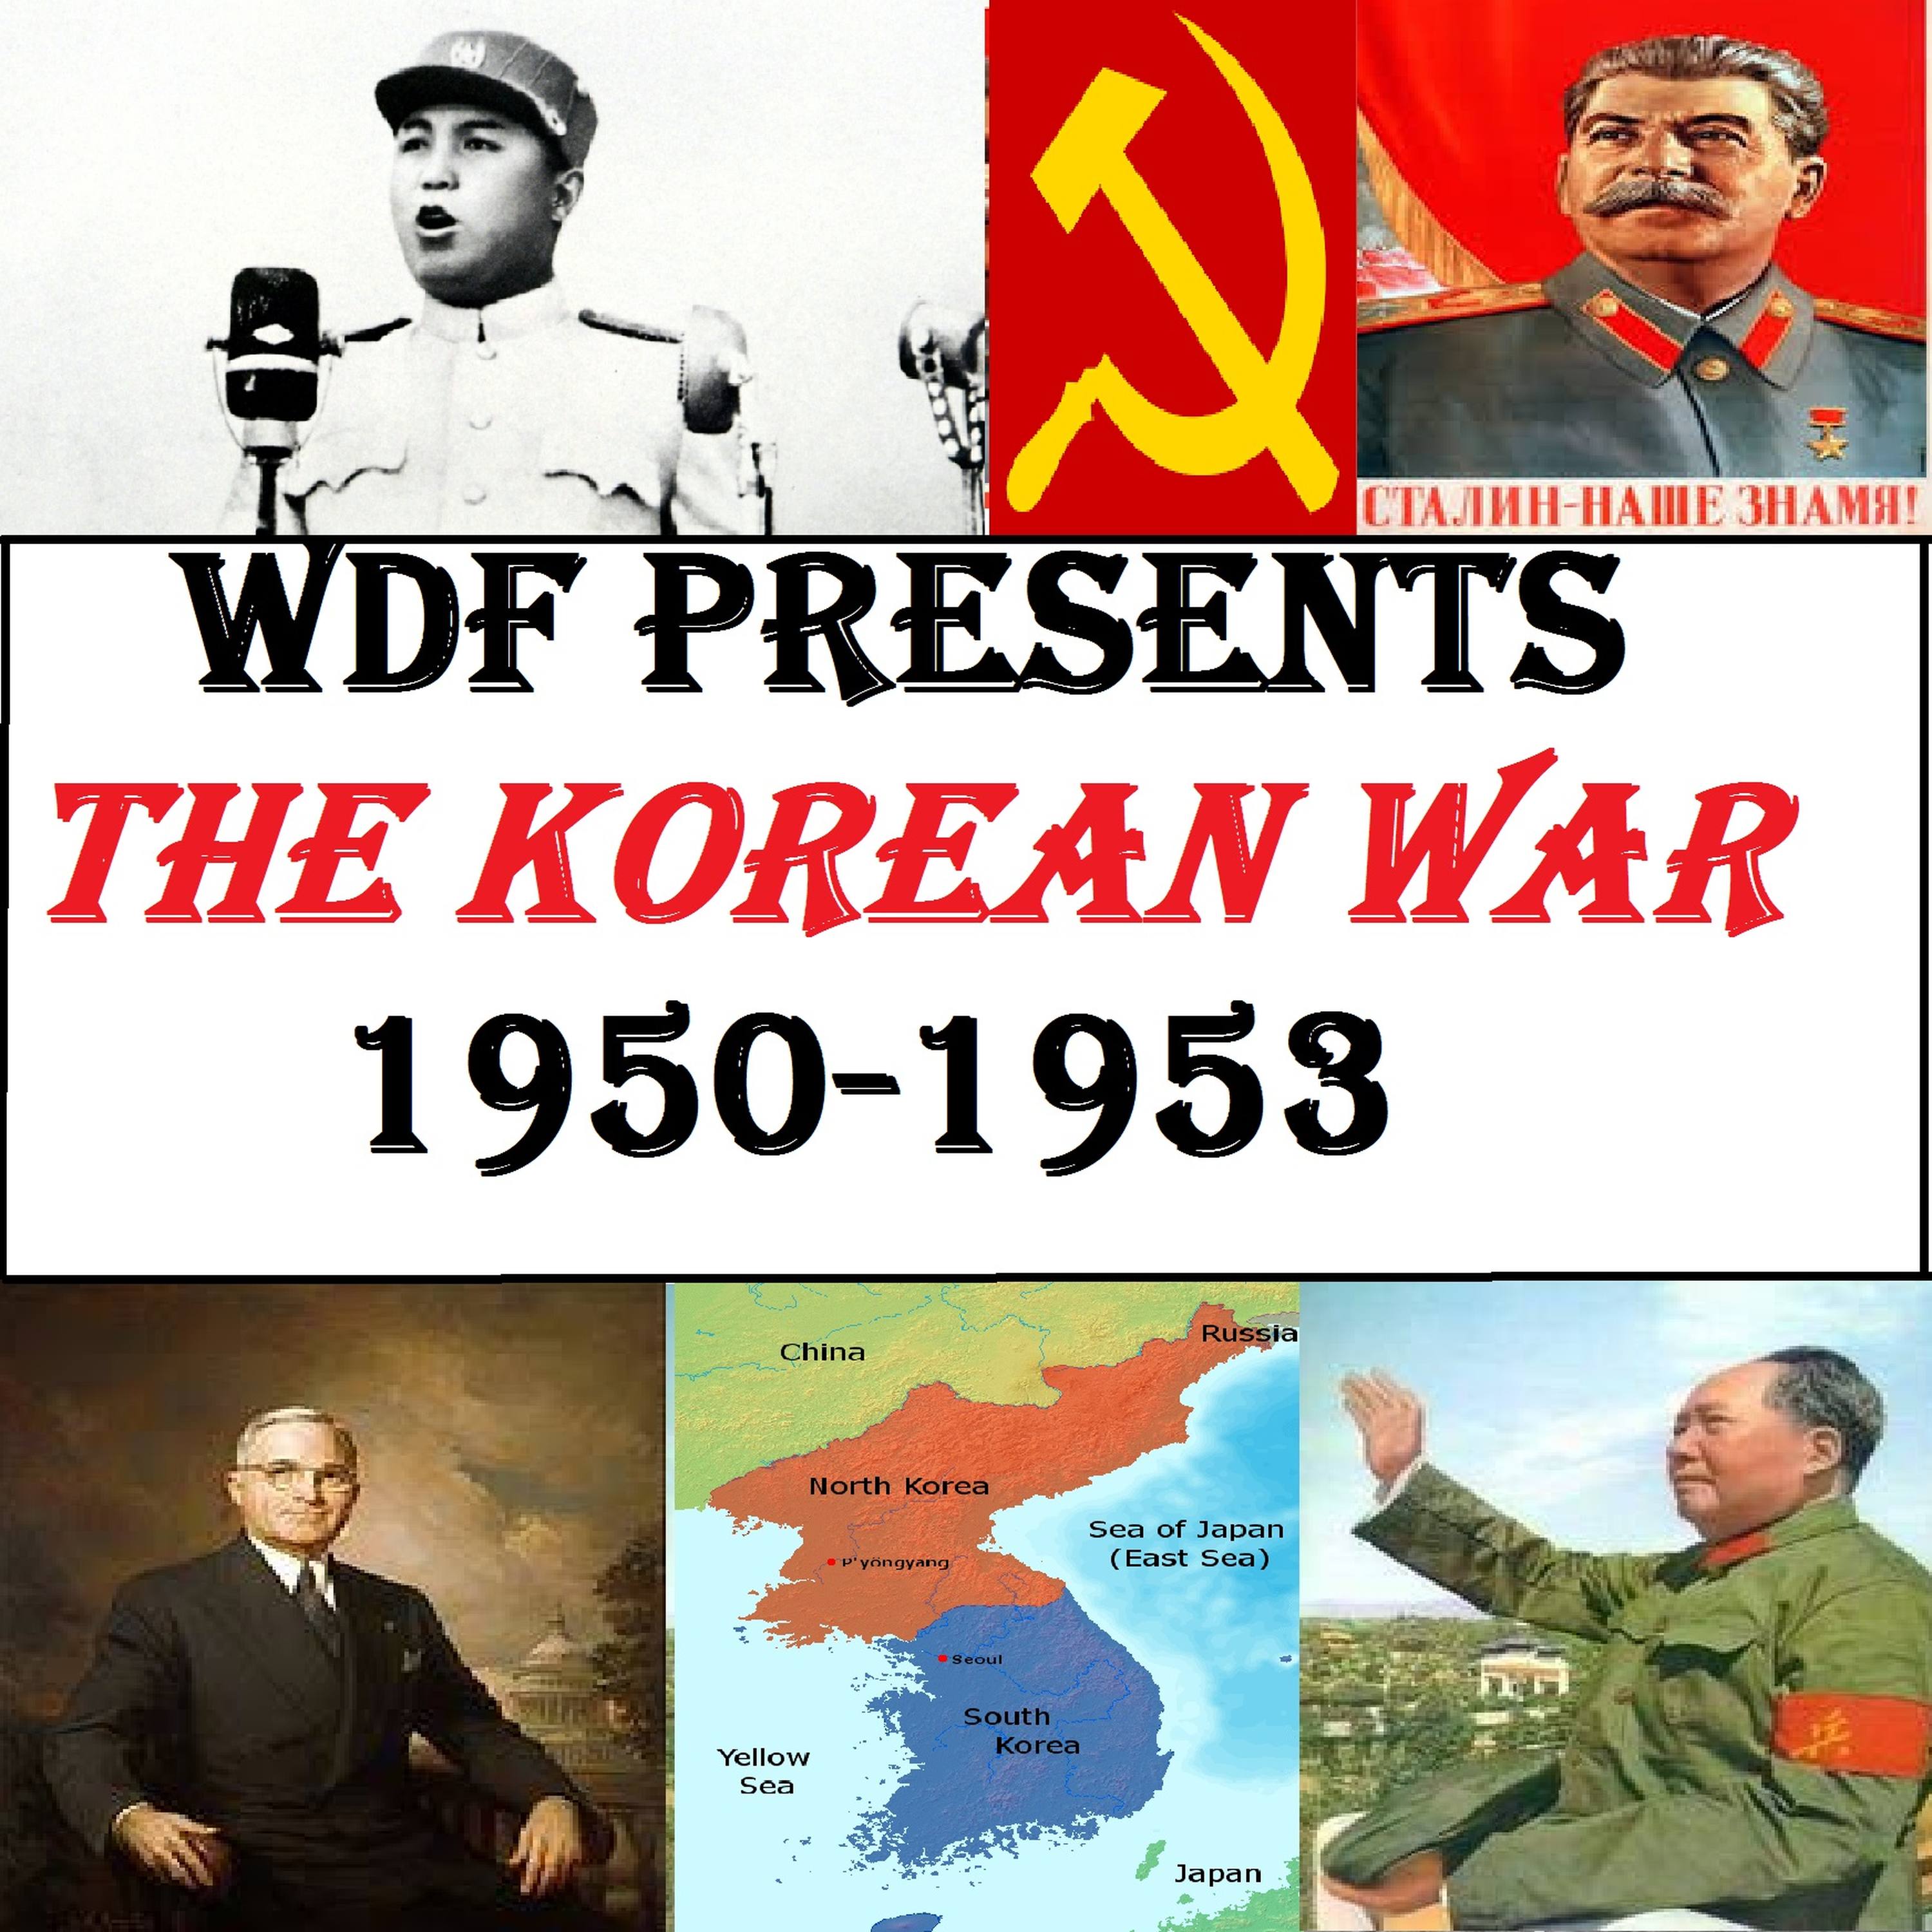 Korean War #21: In Support Of My Thesis